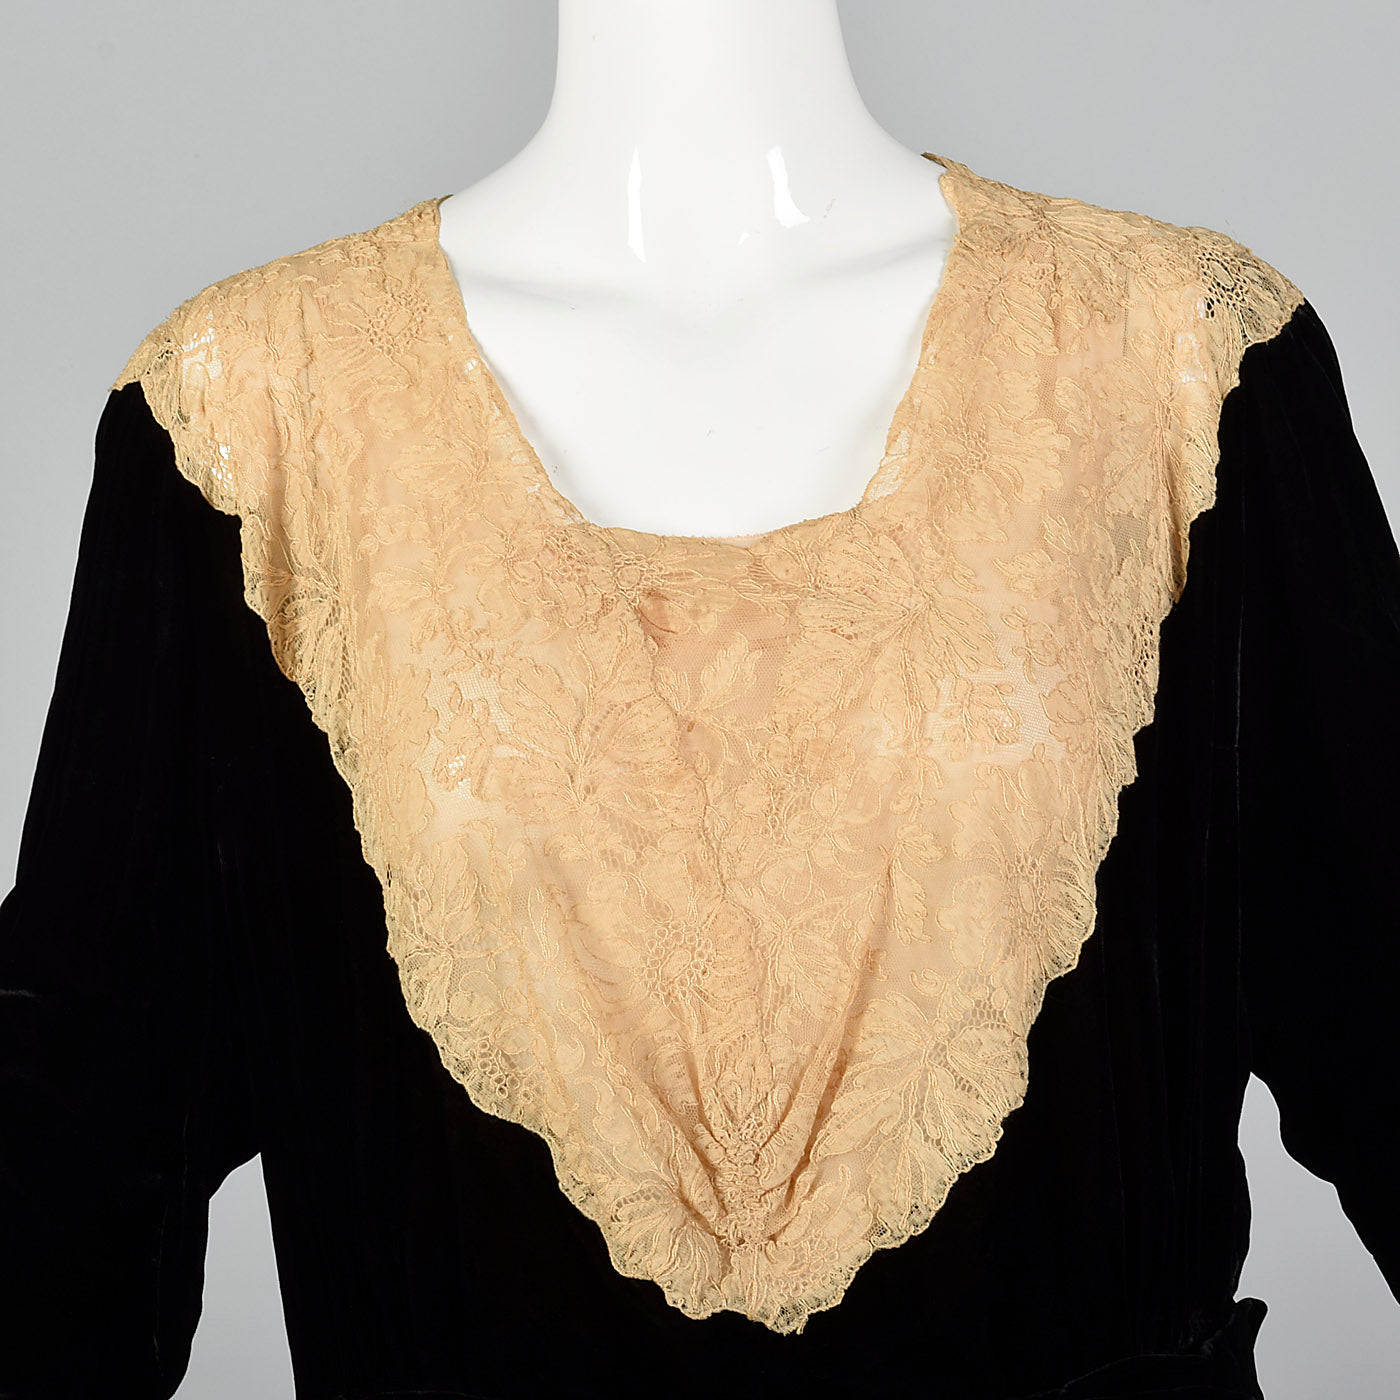 1920s Black Silk Velvet Dress with Lace Collar and Cuffs